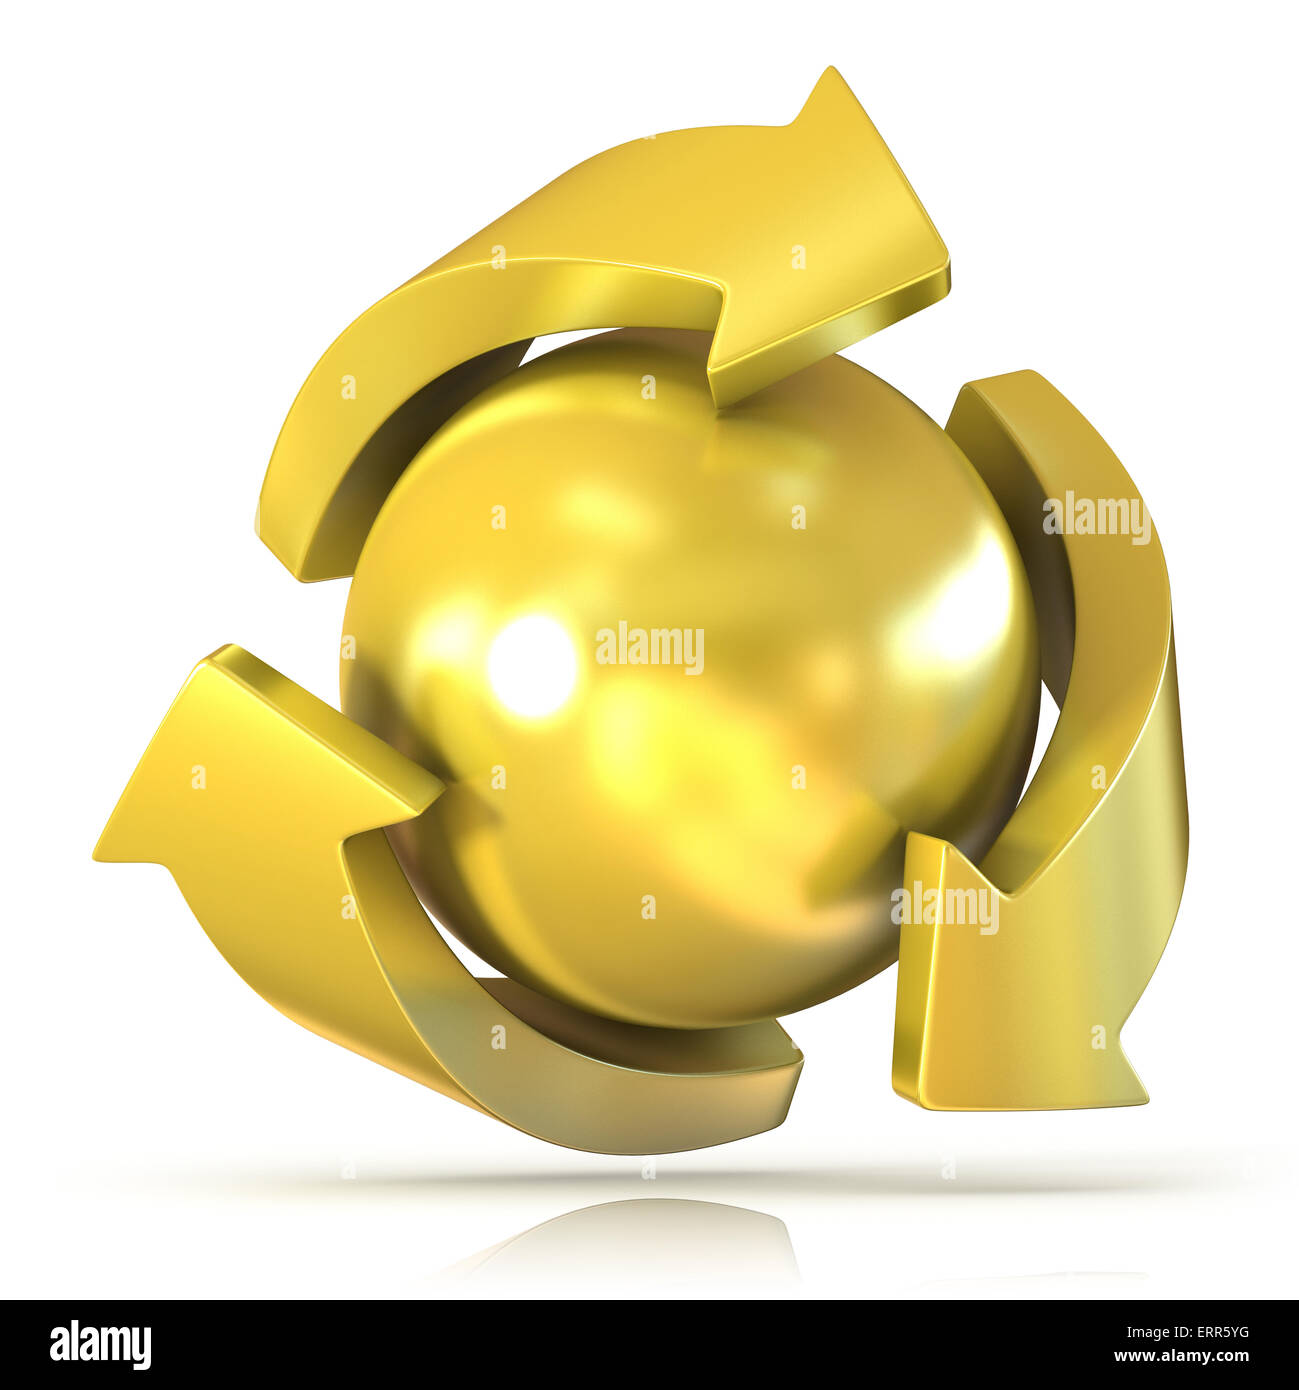 Golden recycle sign, three arrows around ball, isolated on white background Stock Photo